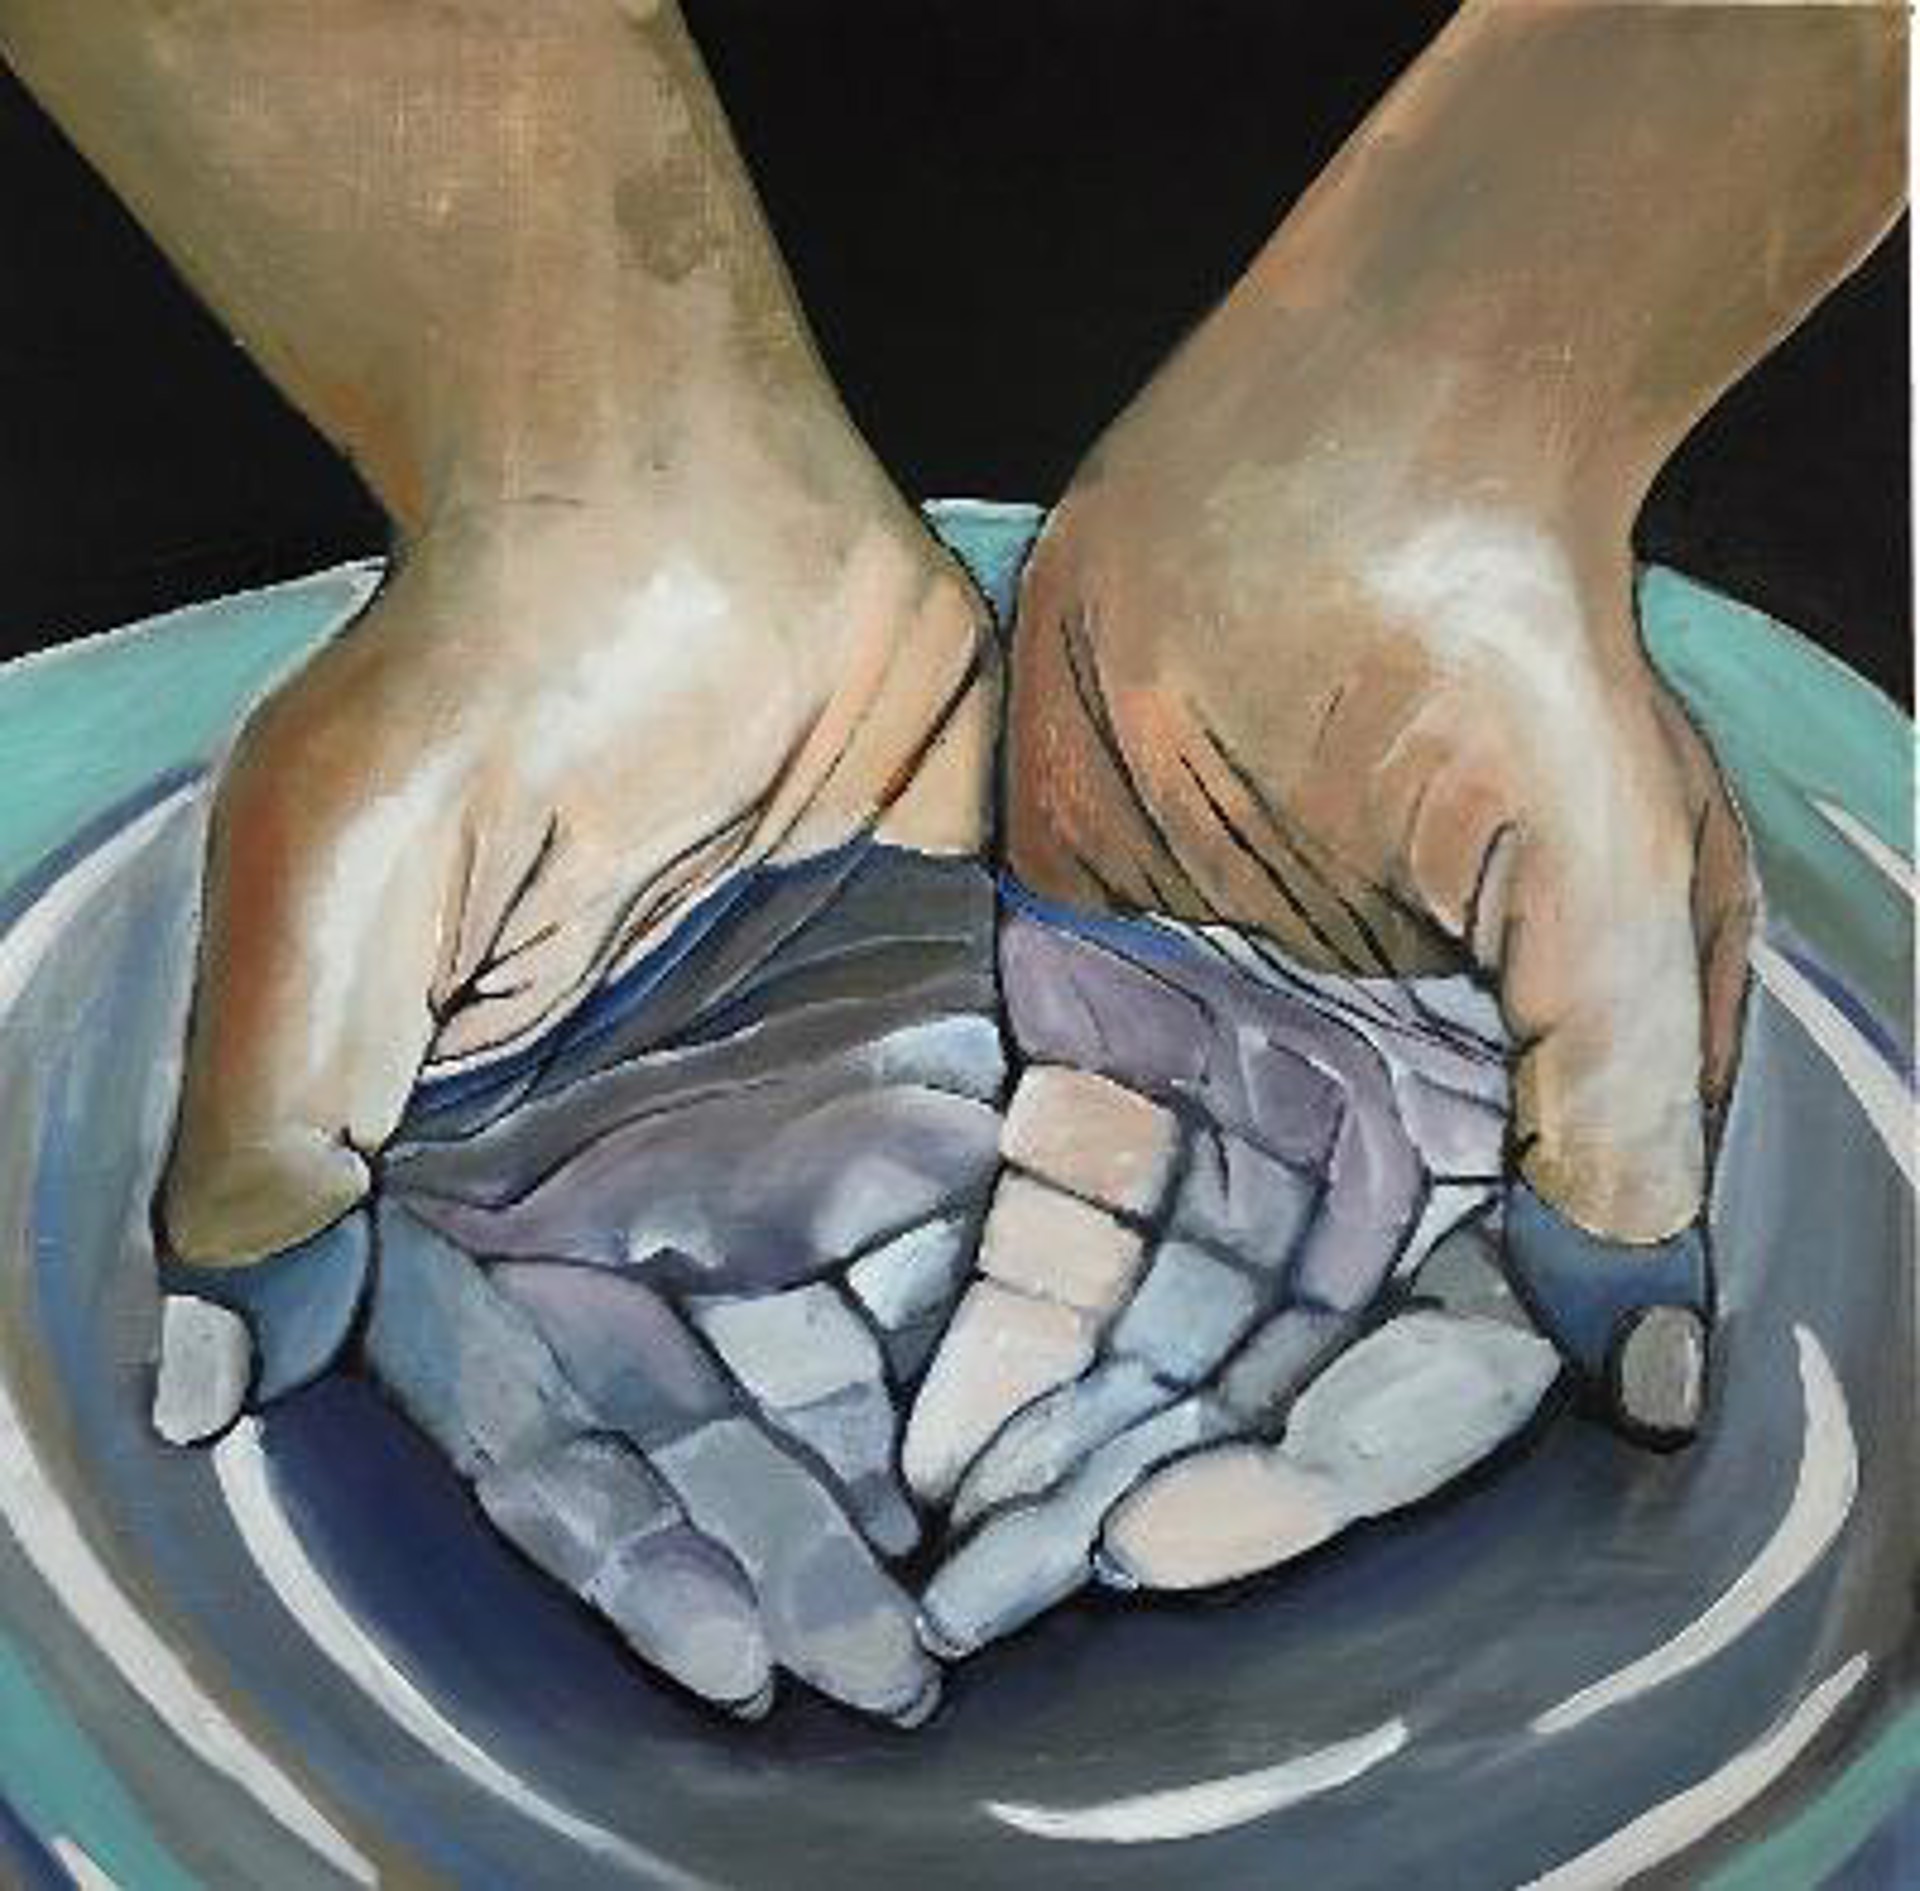 Must Wash Hands by Beth Aronoff